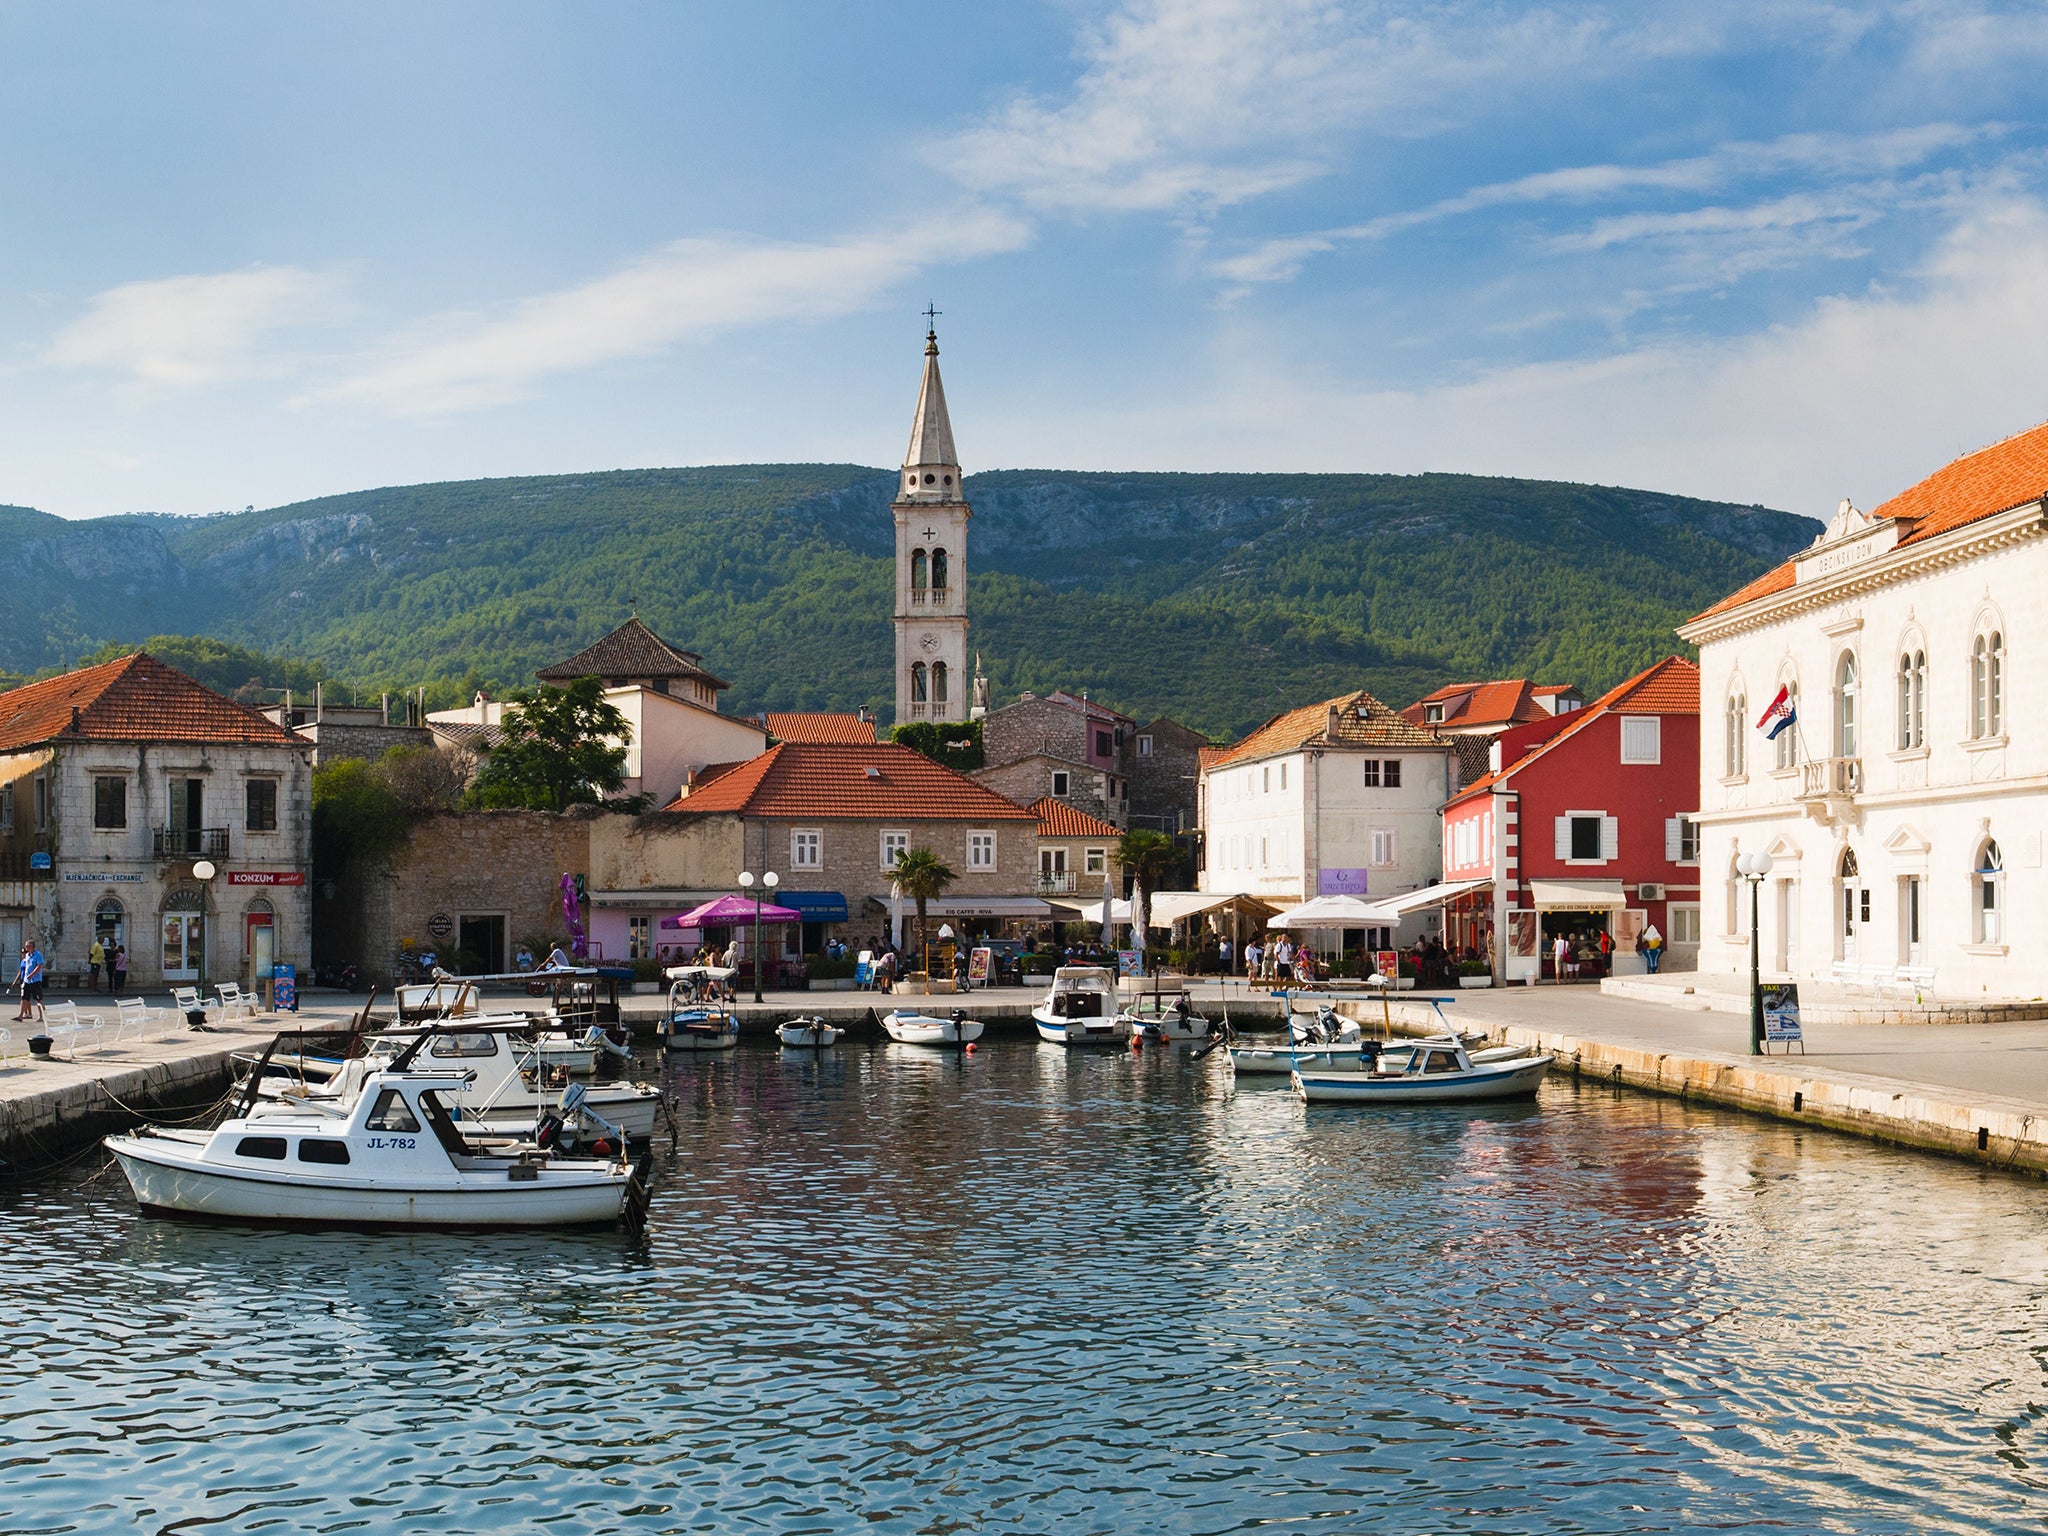 Croatia is number 27 on the list of world's safest countries